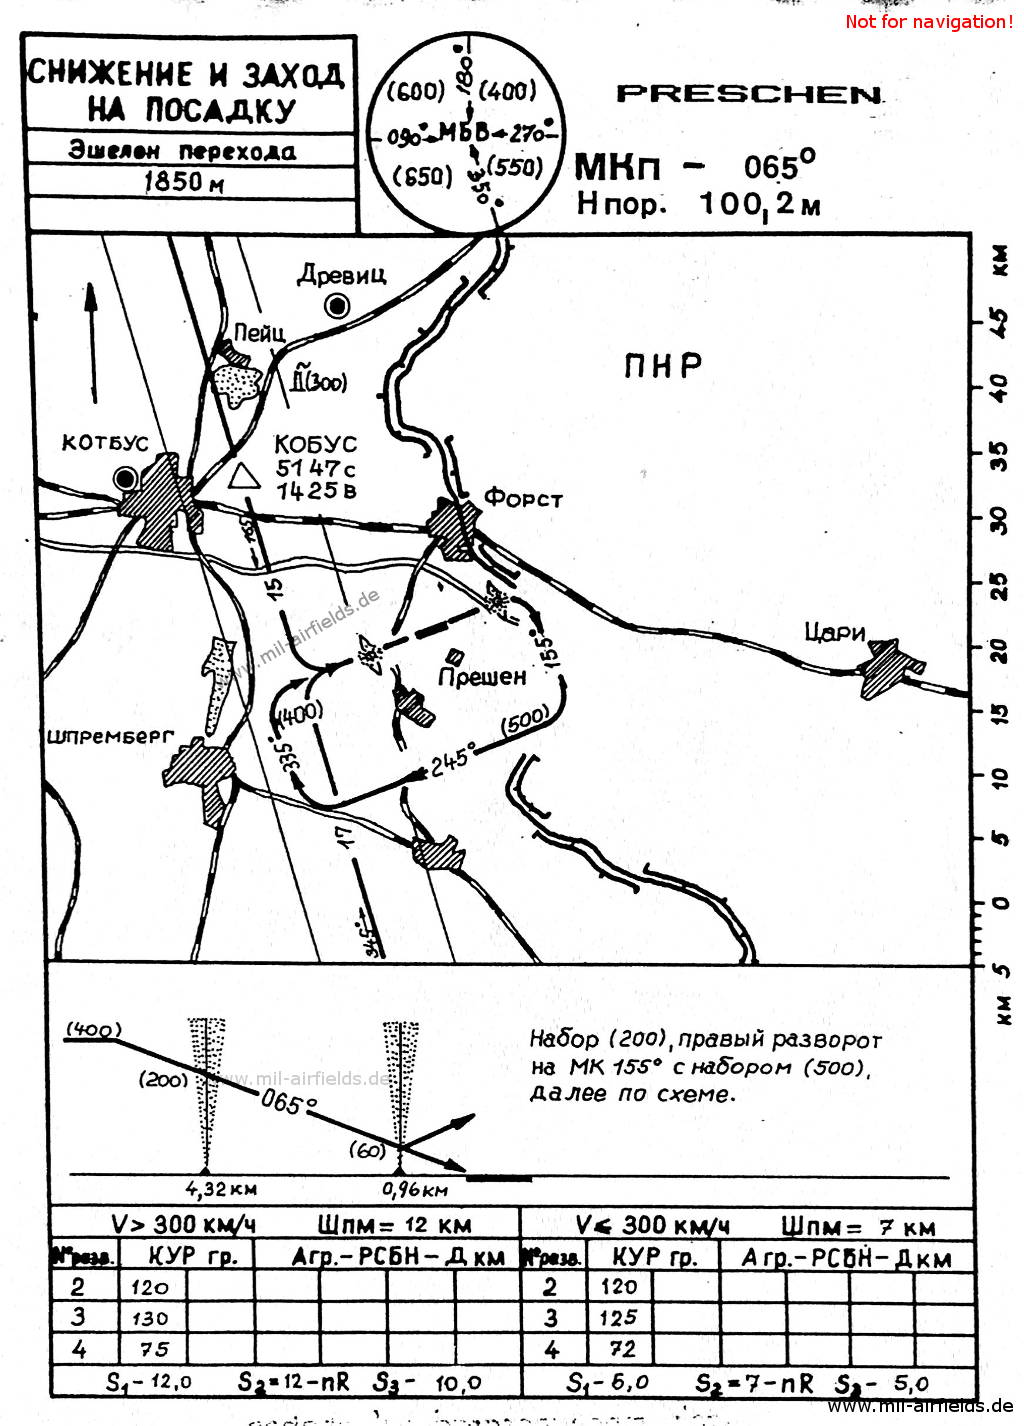 Chart with approach routes to Preschen Air Base in secondary landing direction